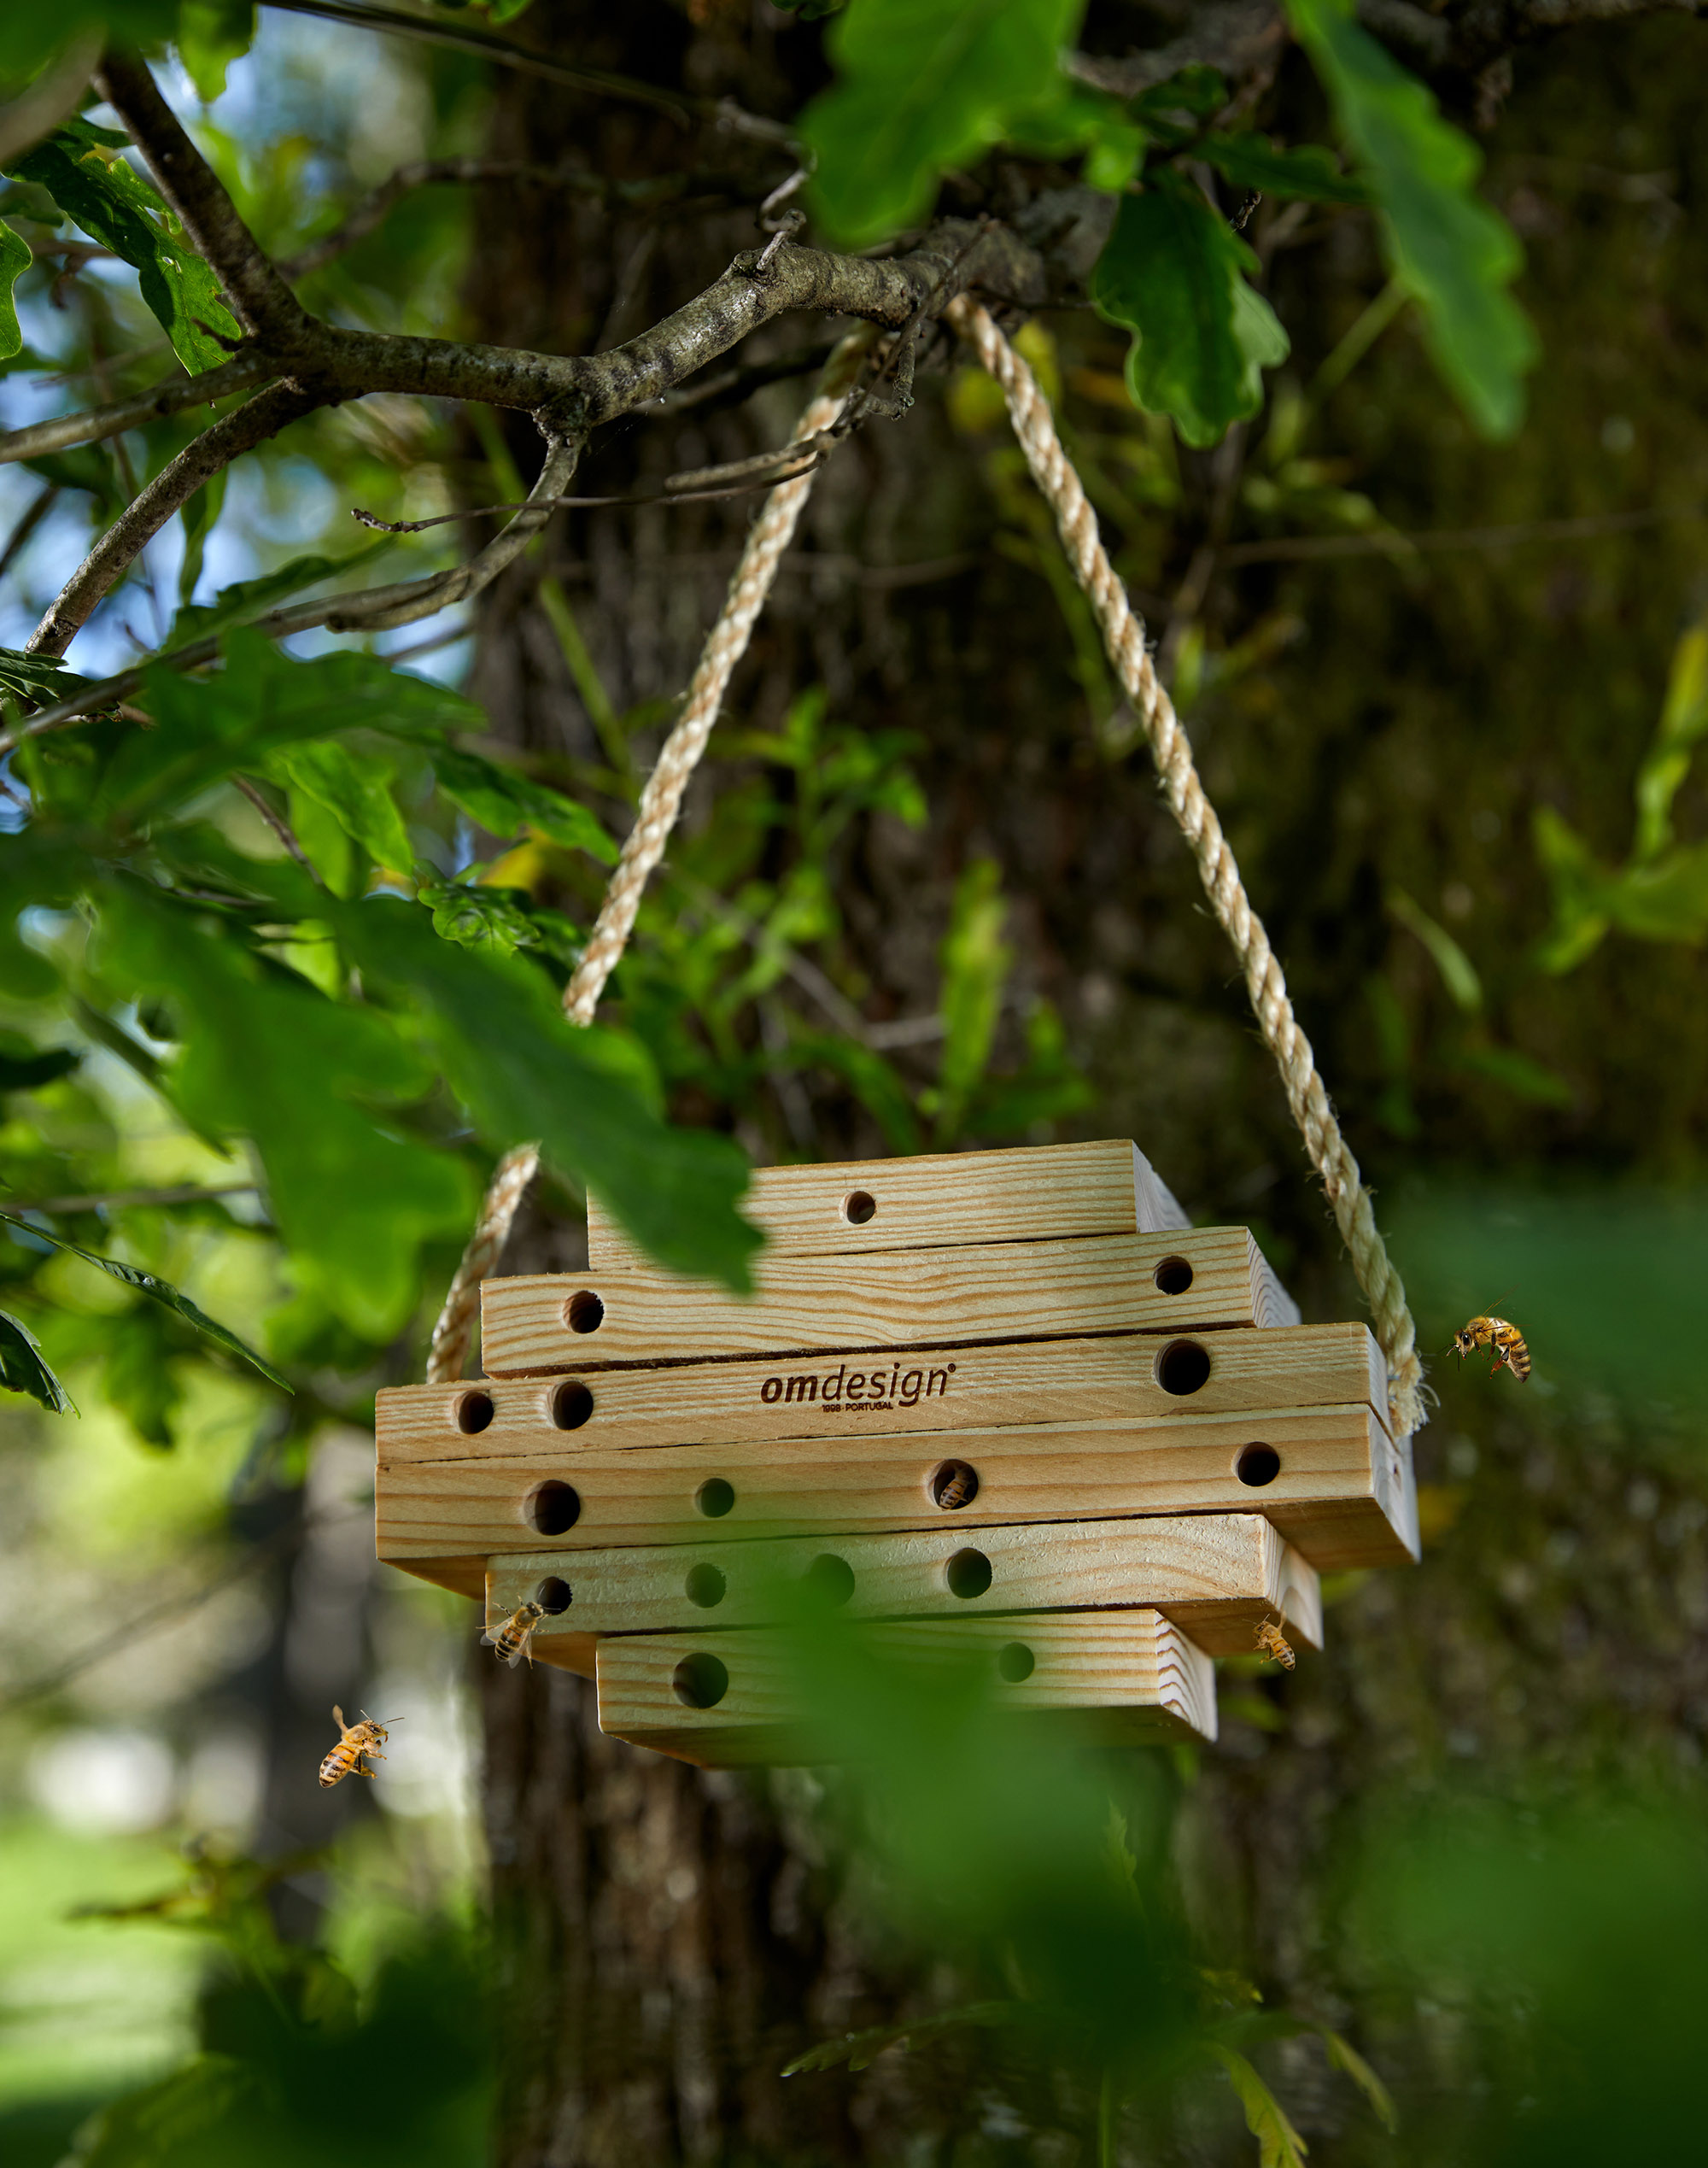 OMel – The Bee Hotel Created by Omdesign